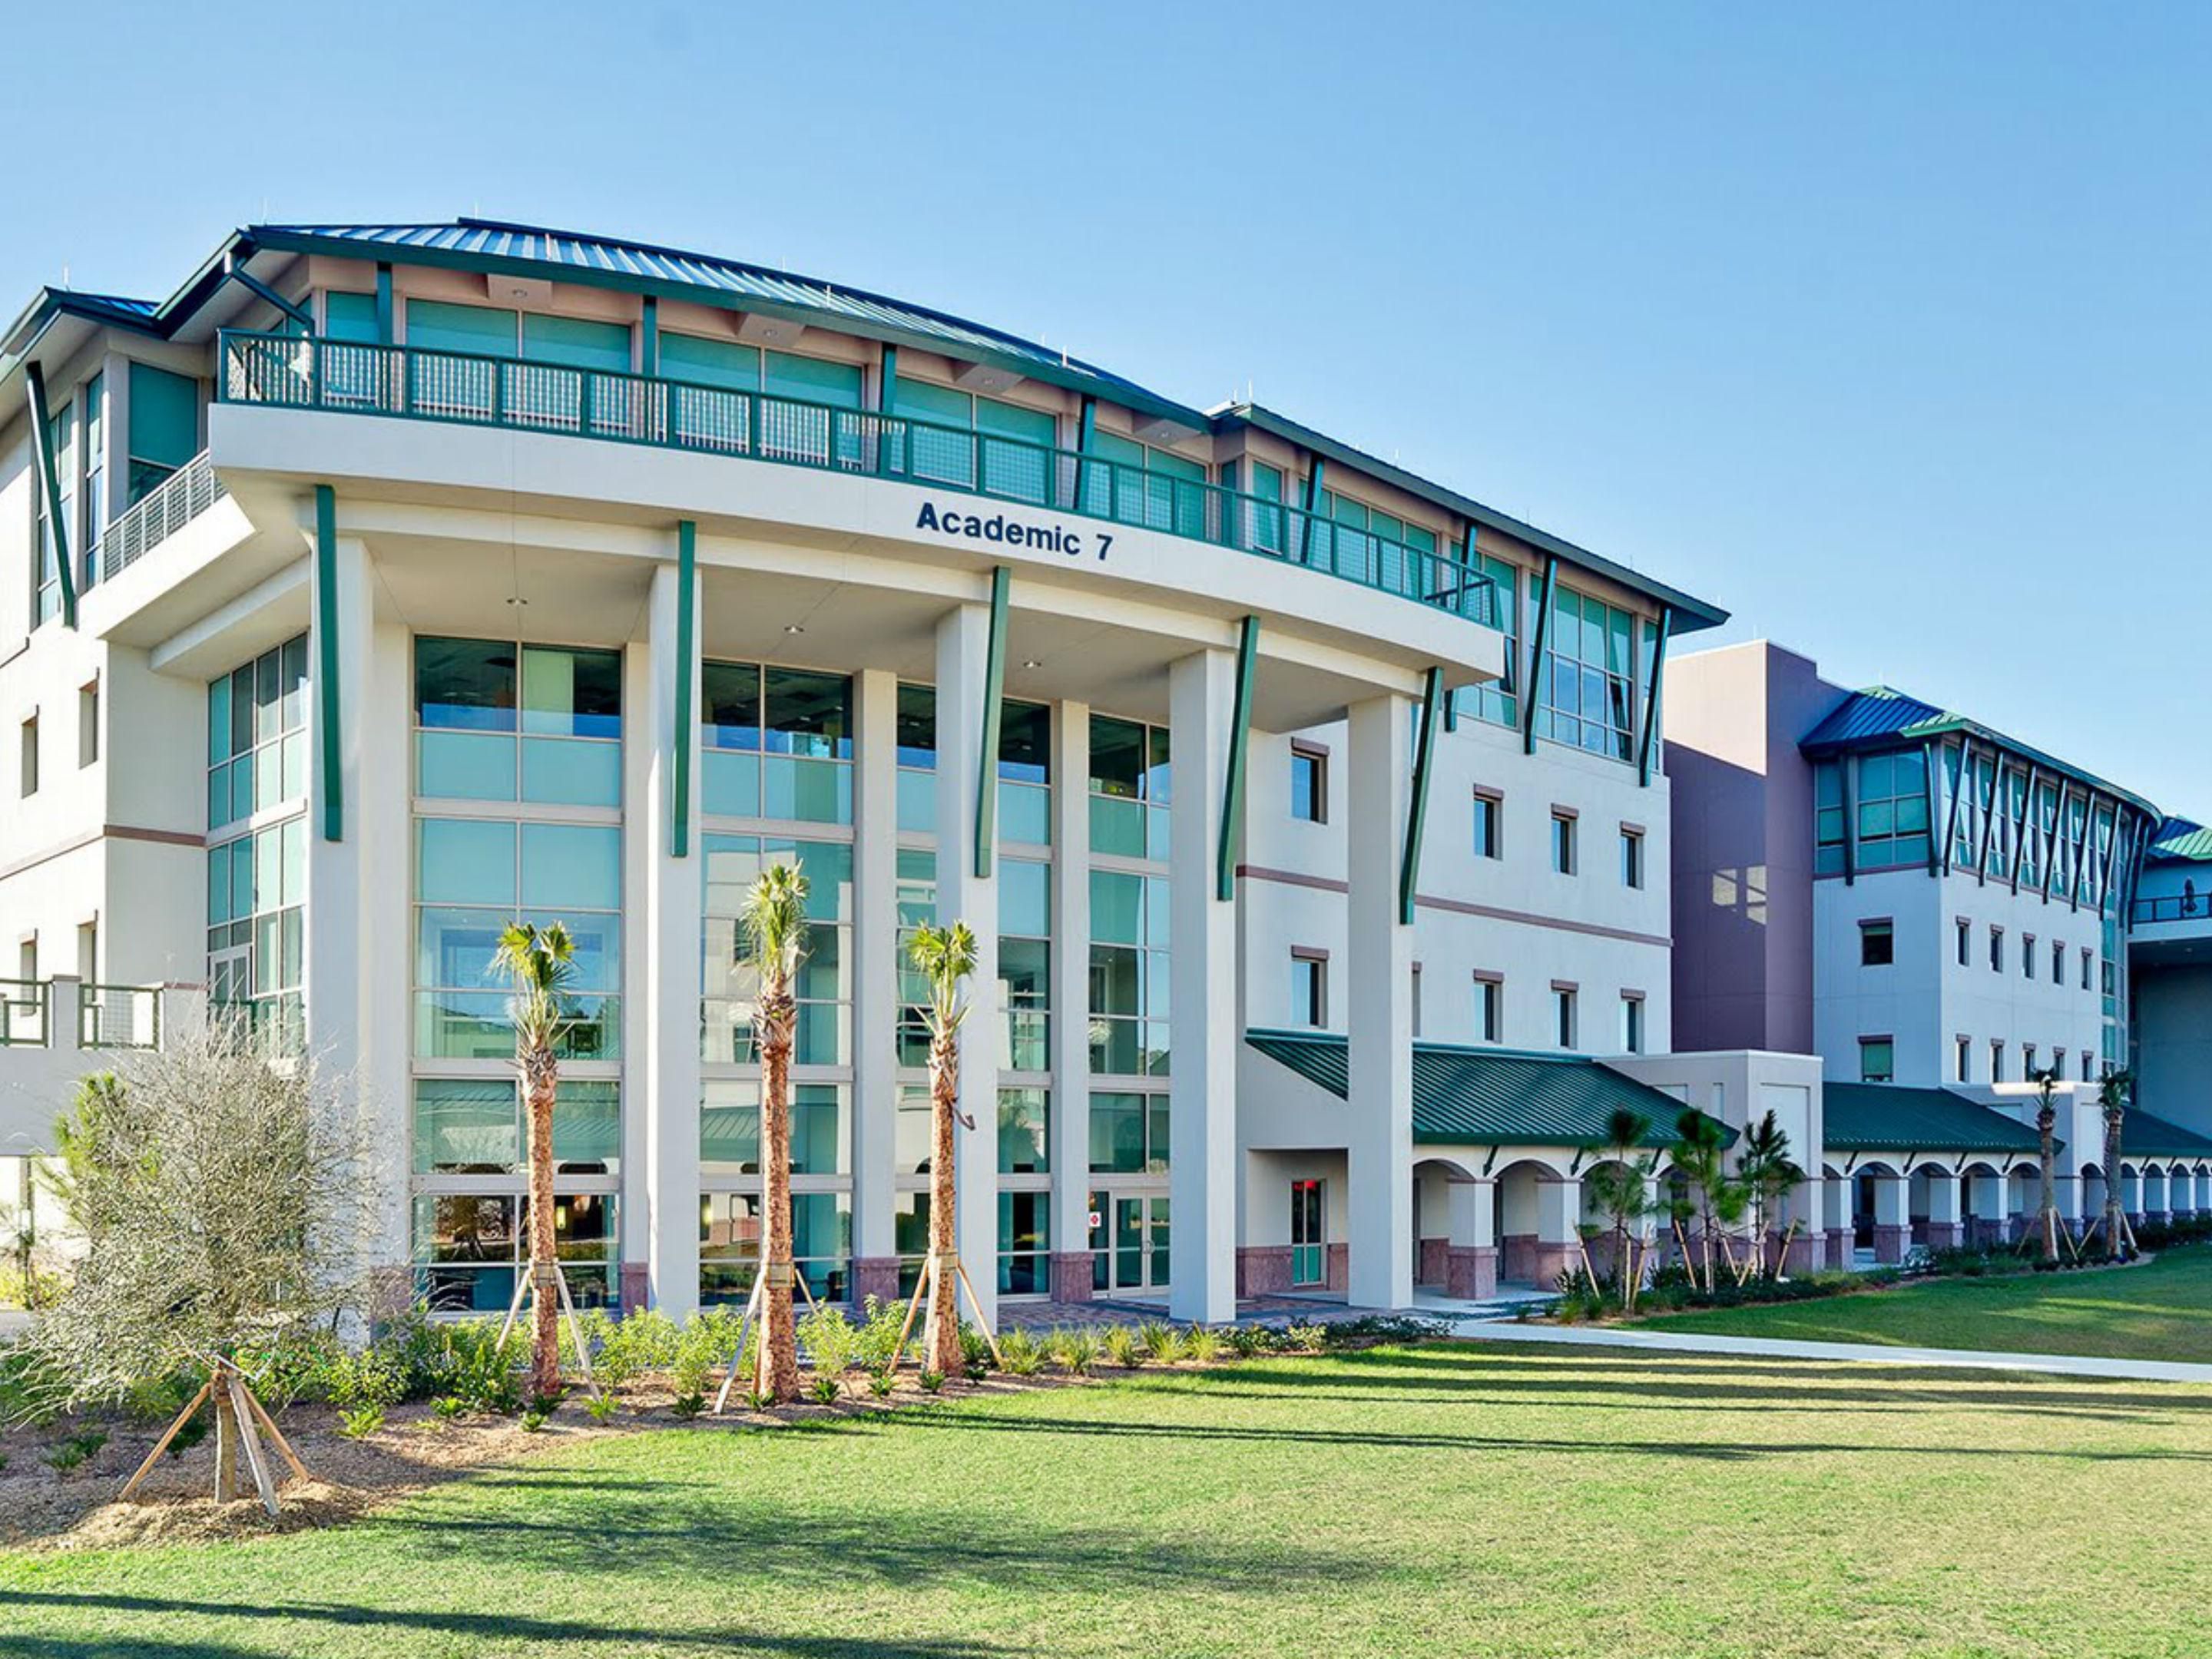 Take in a Florida Everblades Game or enjoy a concert at the nearby Hertz Arena or stop by Florida Gulf Coast University to visit your young scholar. Our hotel is less than fifteen minutes from the Hertz Arena, FGCU, and the Southwest Florida International Airport.